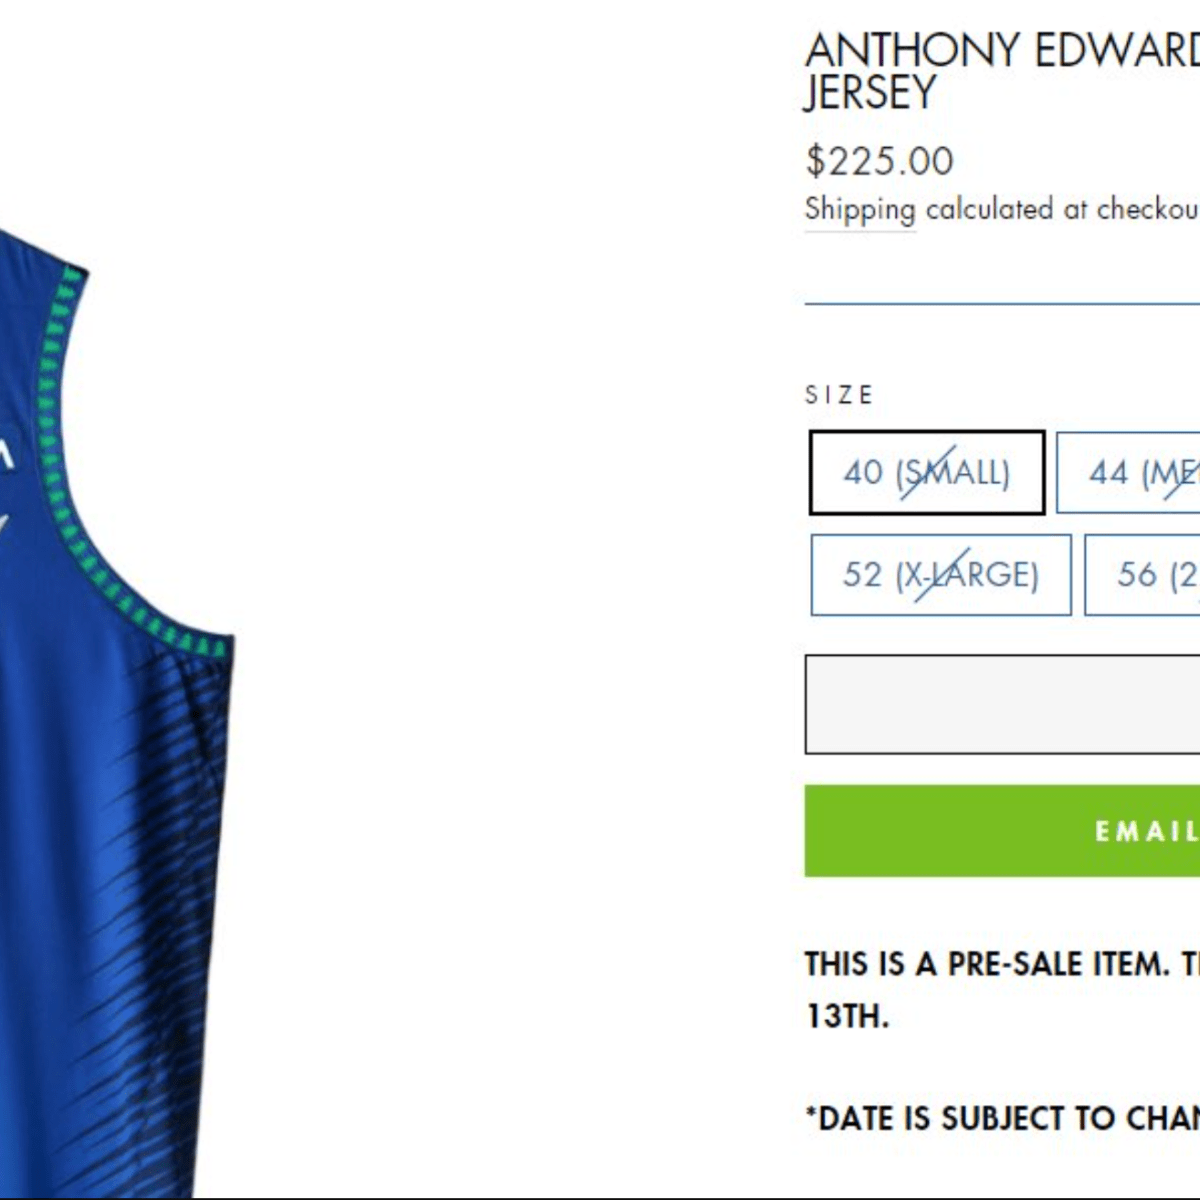 Anthony Edwards City Edition Timberwolves jerseys sell out immediately -  Bring Me The News